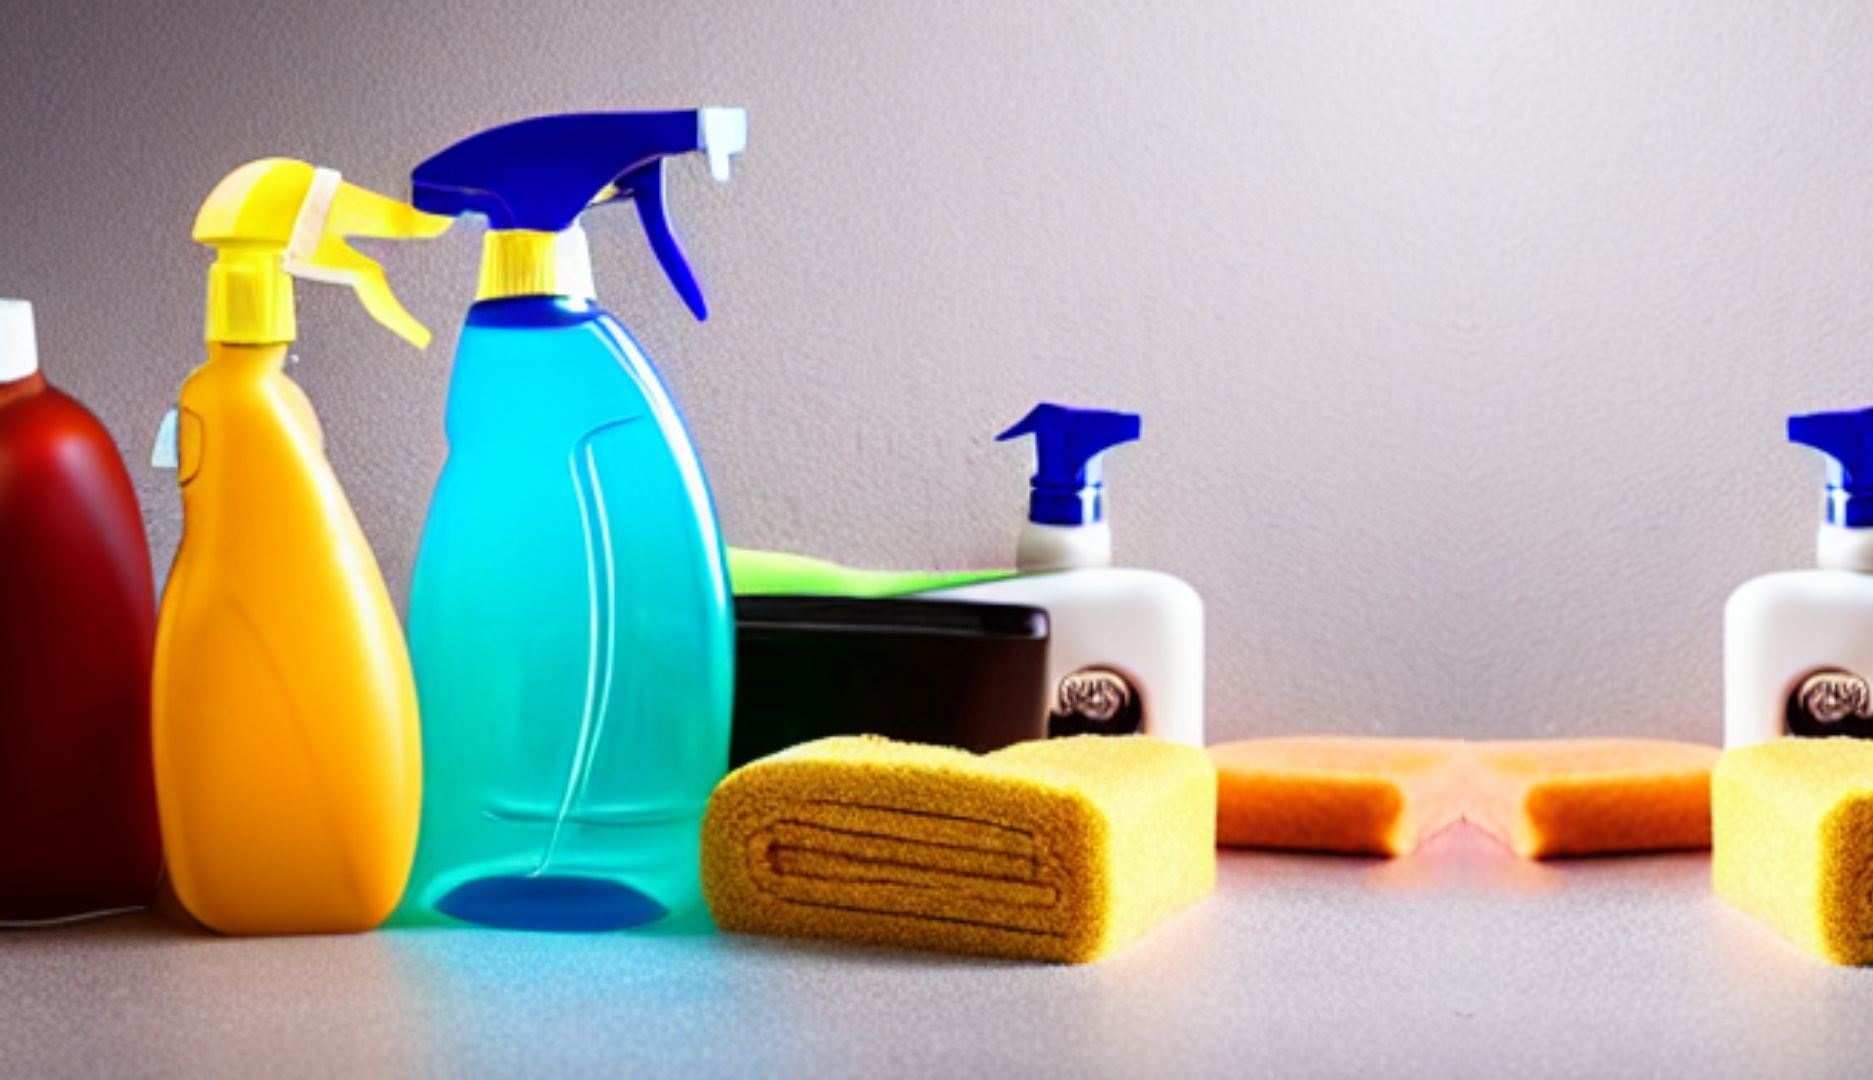 Cleaning Products Business Plan